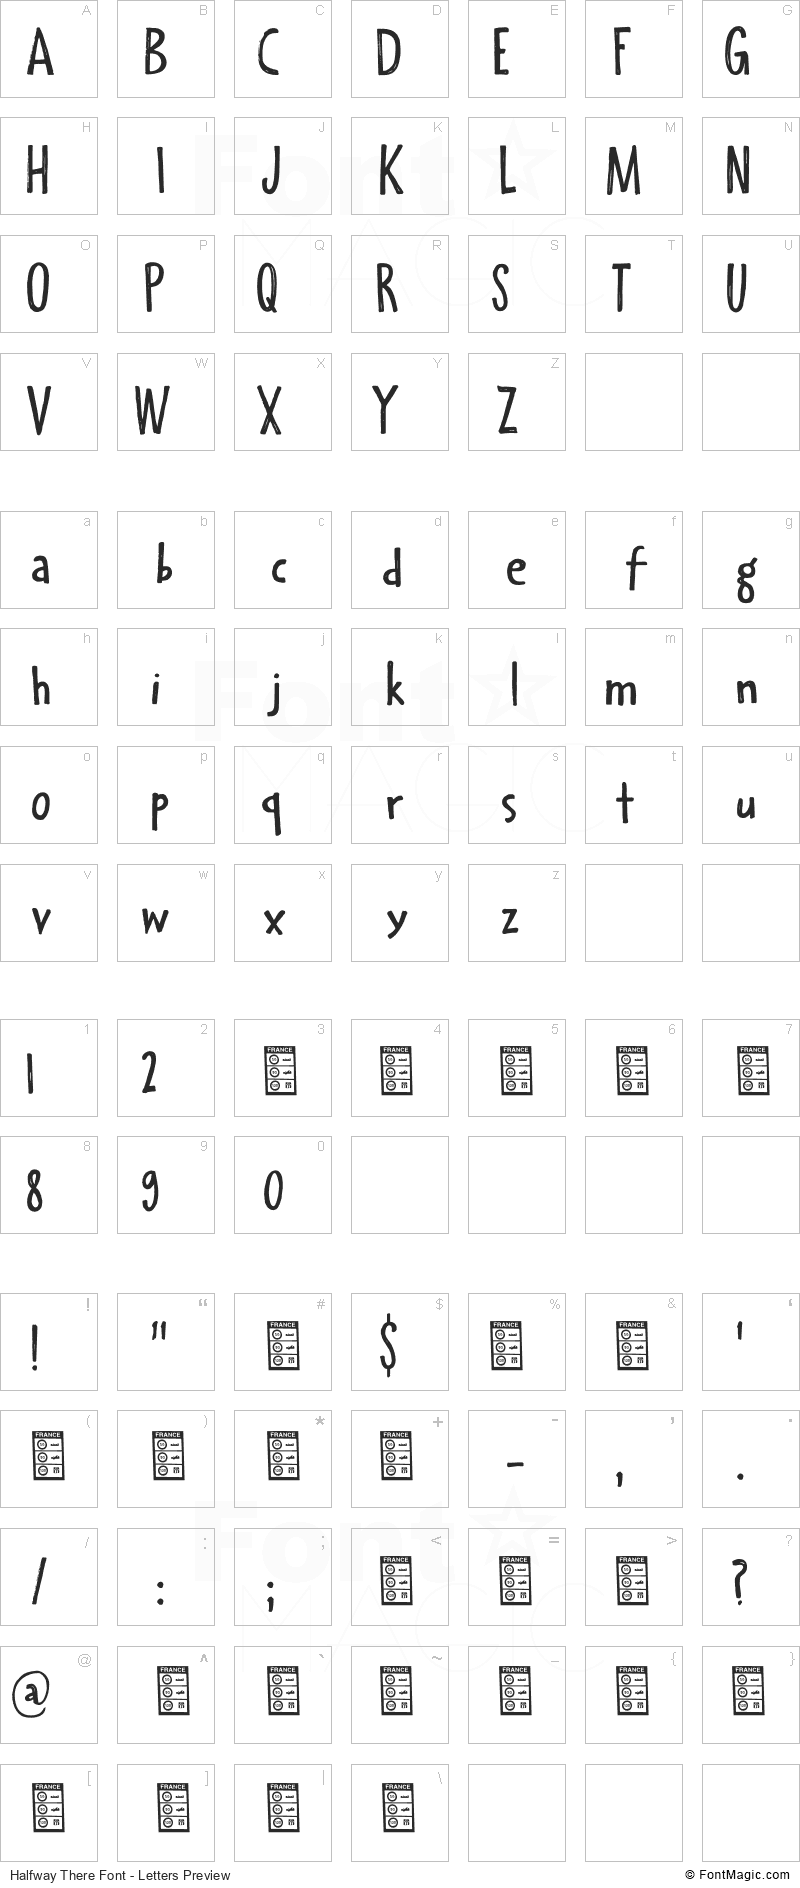 Halfway There Font - All Latters Preview Chart